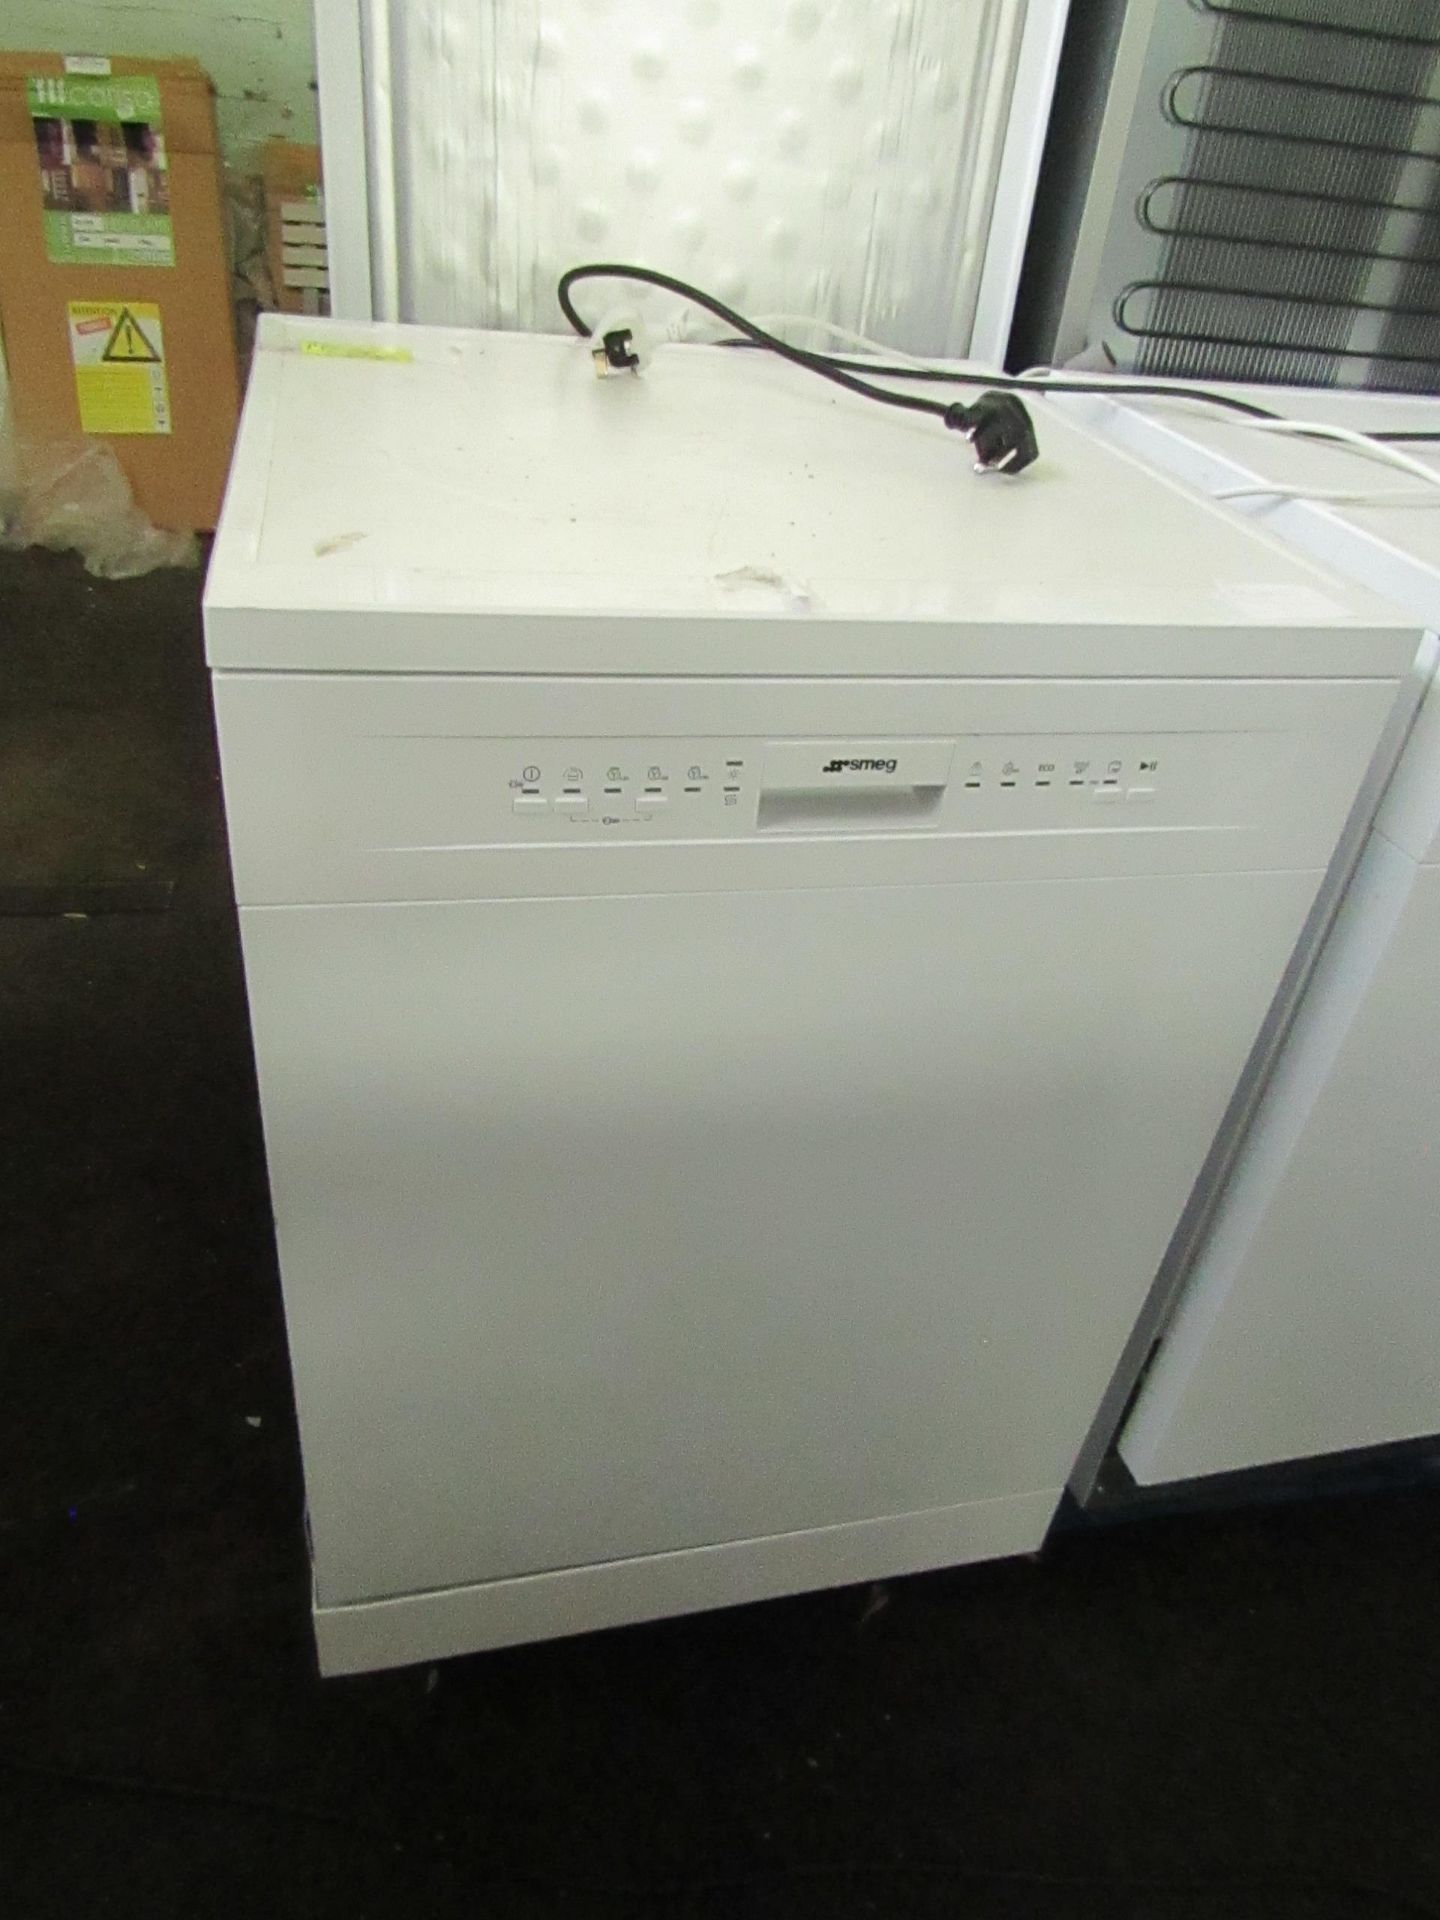 Smeg Dishwasher, Powers on and looks clean inside